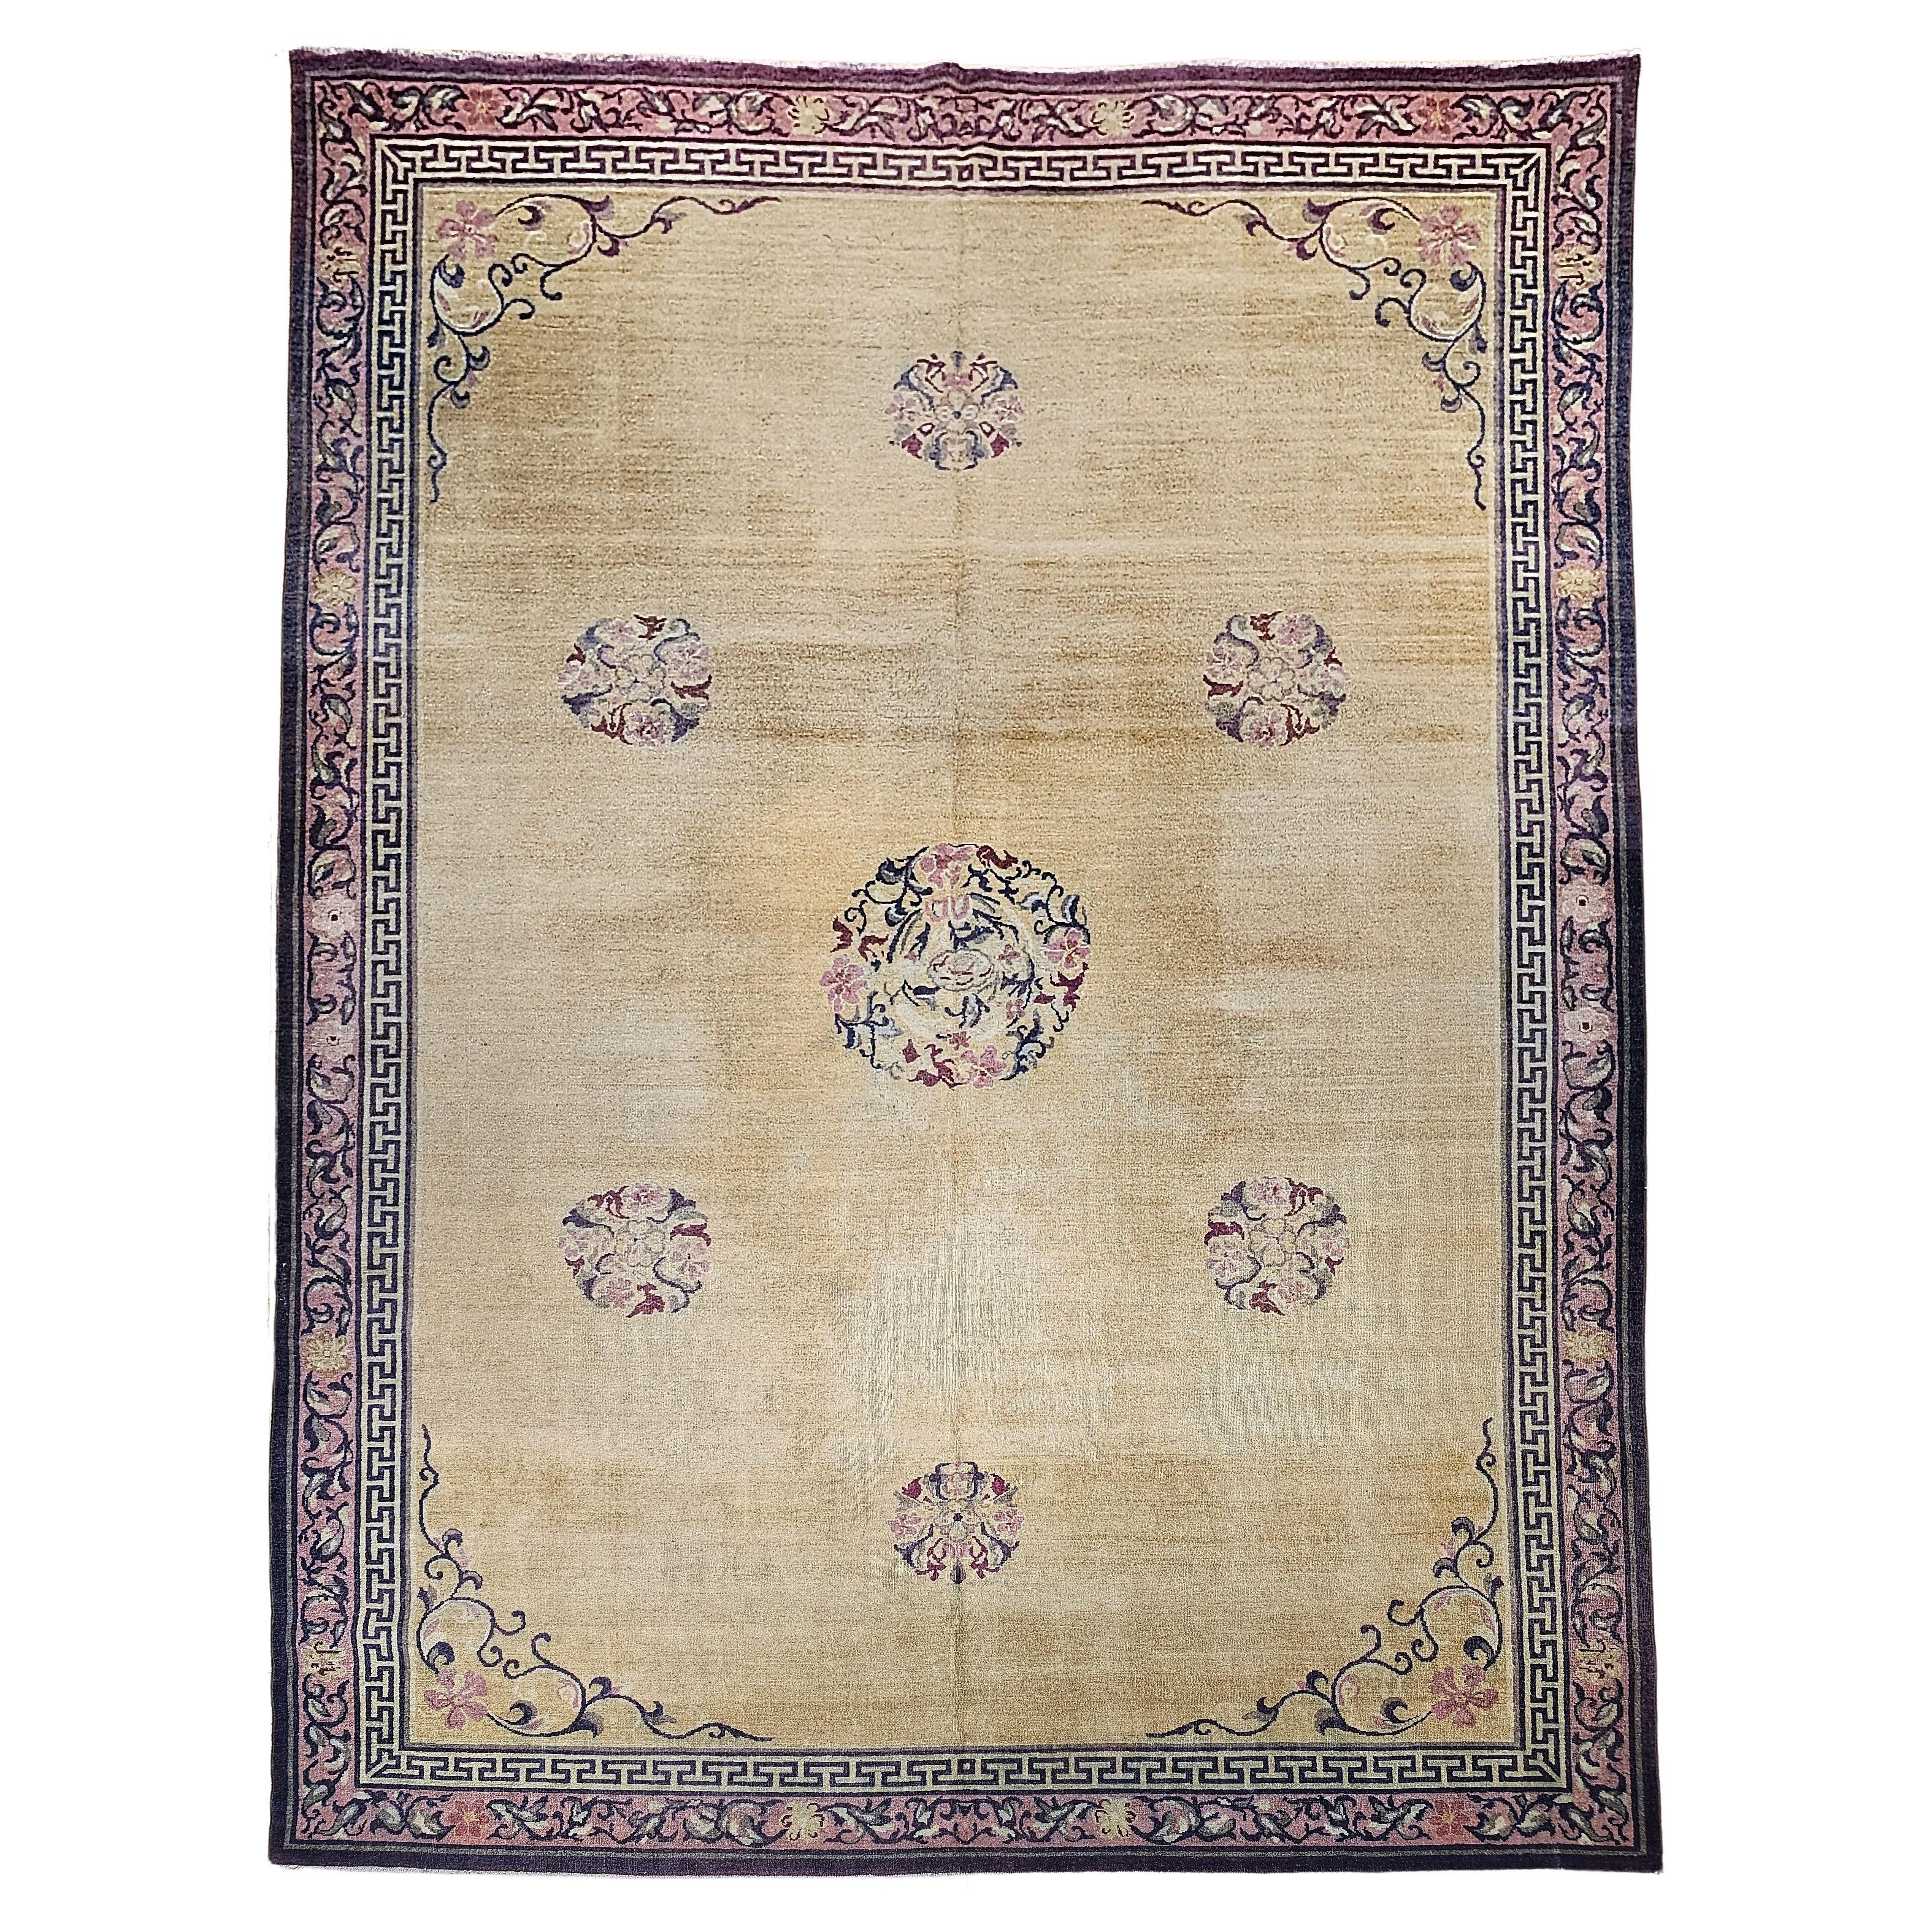 Early 1900s Room Size Indian Agra in Wheat, Burgundy, Olive Green, Brown, Pink For Sale